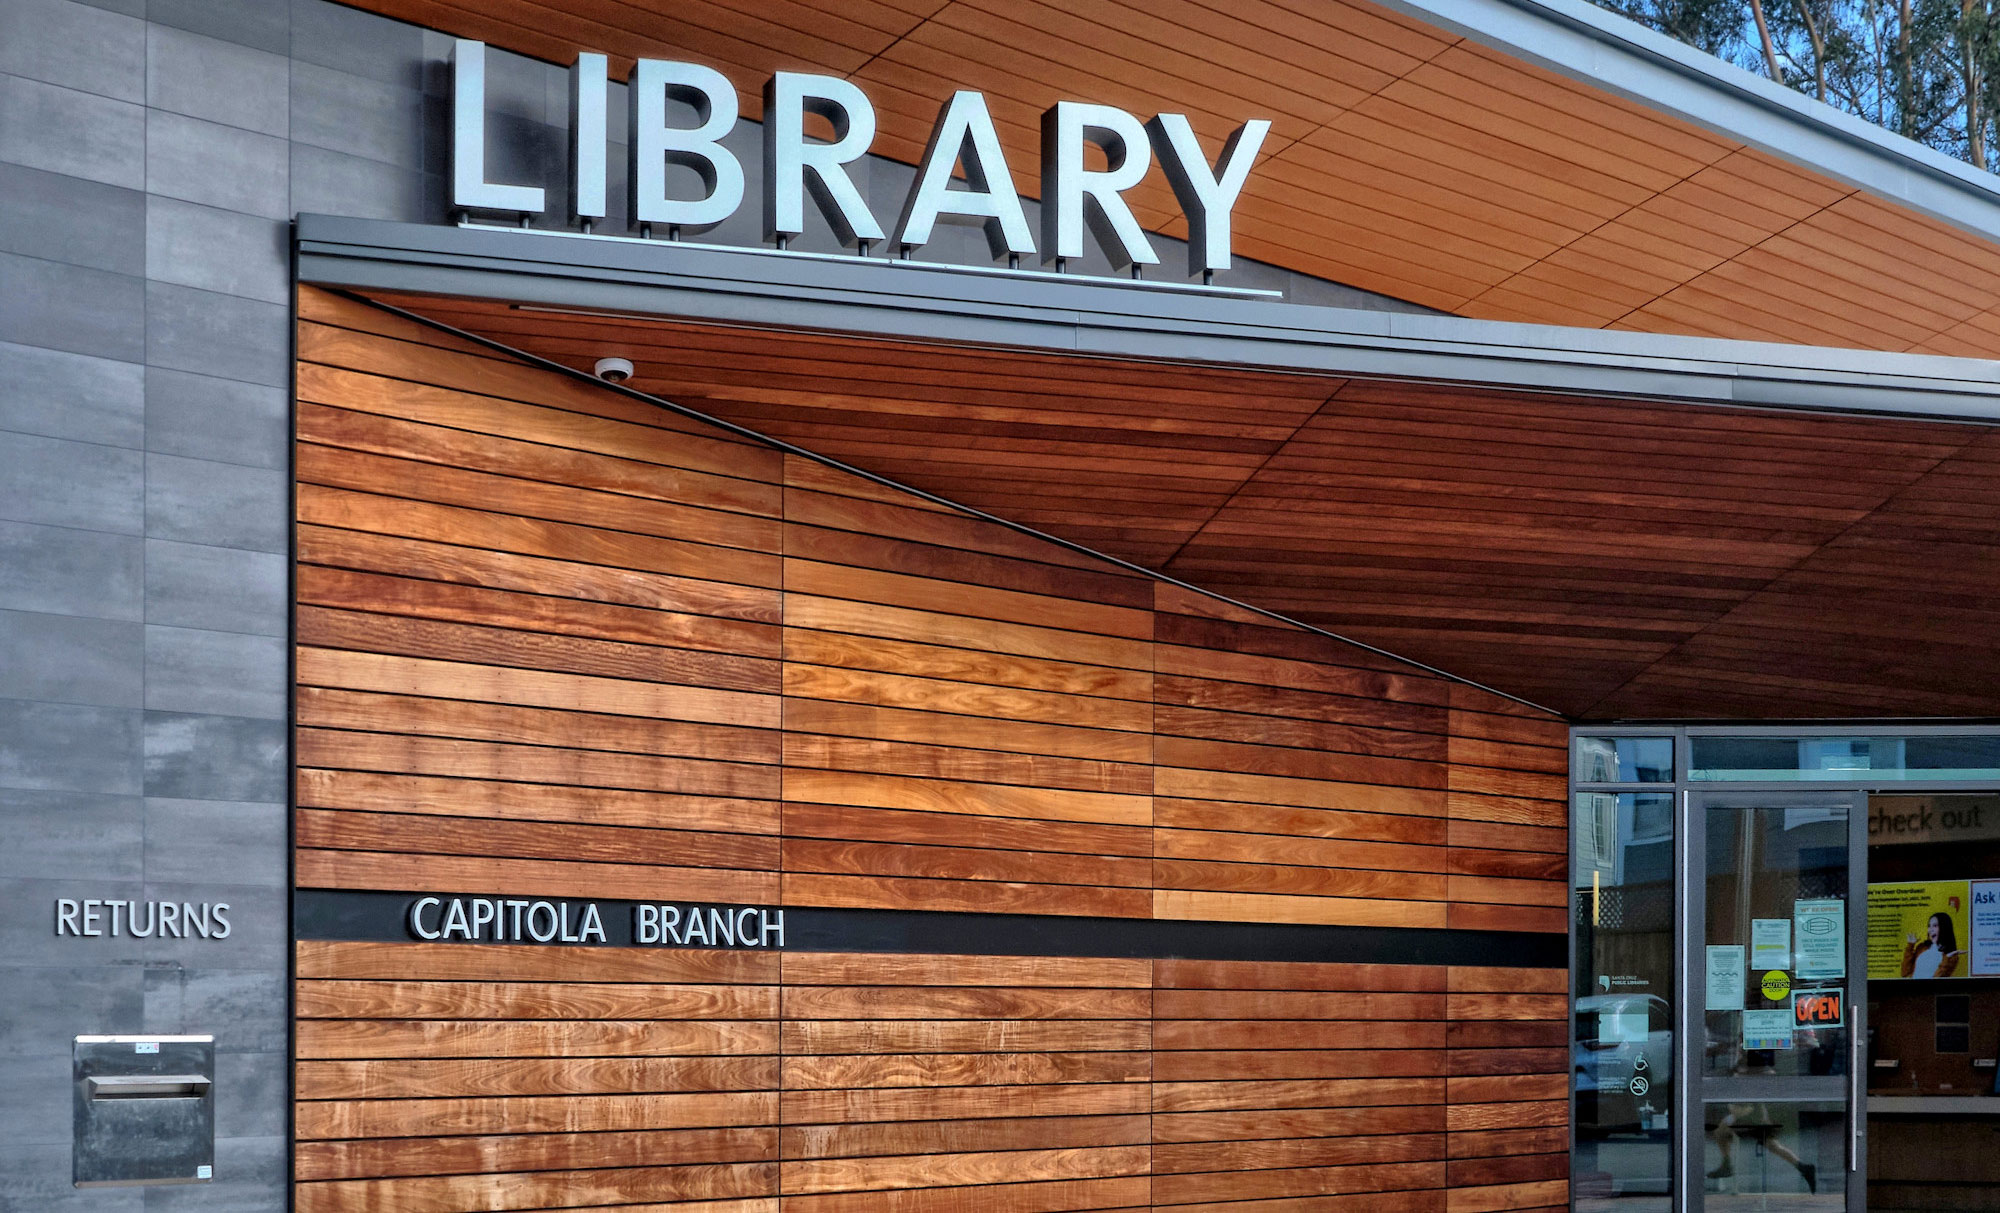 Photo of the Capitola Branch Library